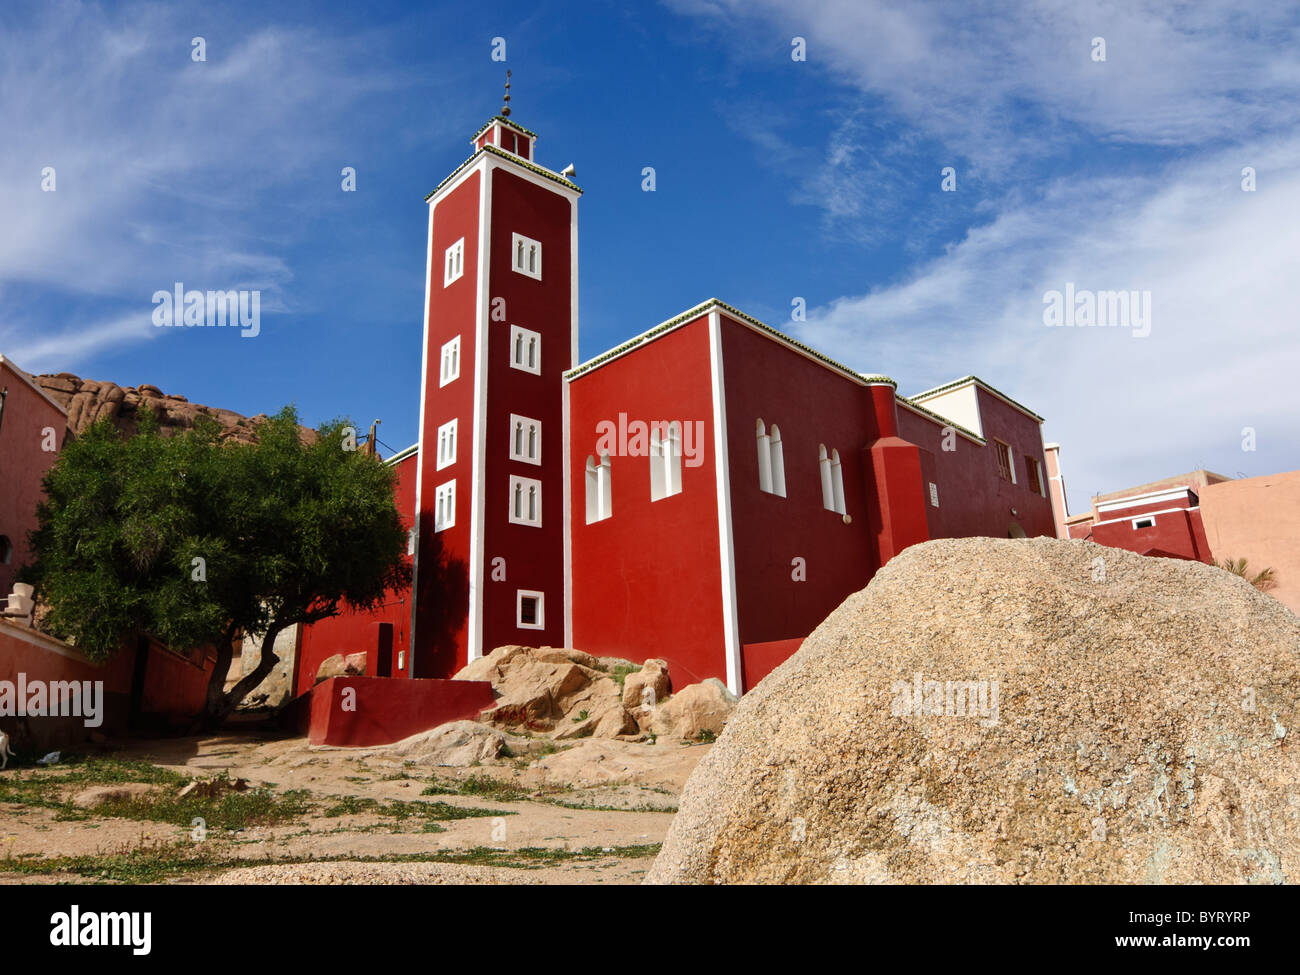 Red painted mosque in the village of Adai, near Tafraoute, Morocco Stock Photo